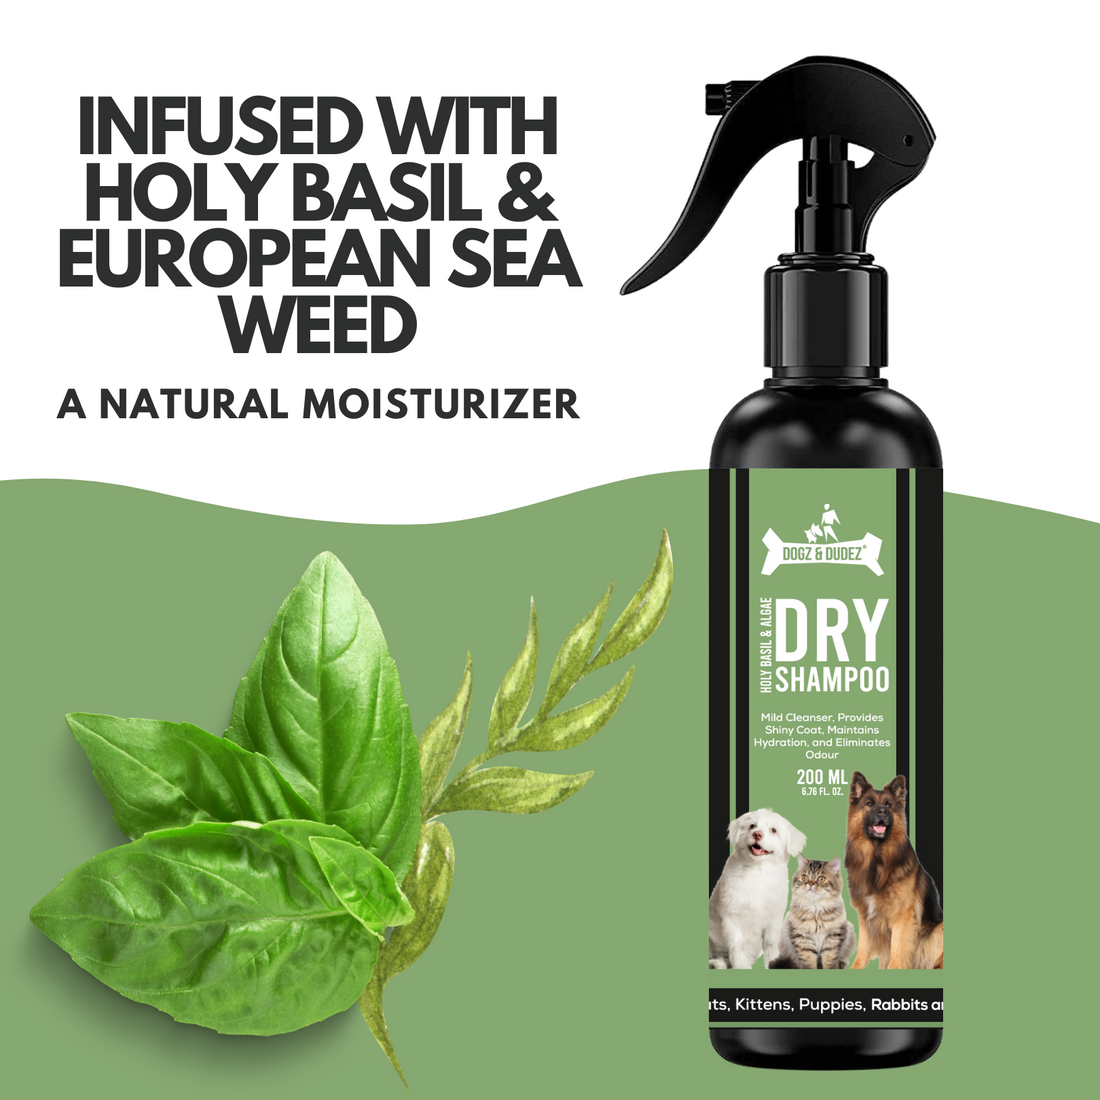 Dogz & Dudez Holy Basil & Algae Dry Shampoo for Dogs & Cats (200 ML)Removes Dirt, Hydrates Skin With Algae Extract to Moisturize skin, provide anti bacterial barrier and Holy Basil for Anti Inflammation | Provides Clean and Shiny Coat